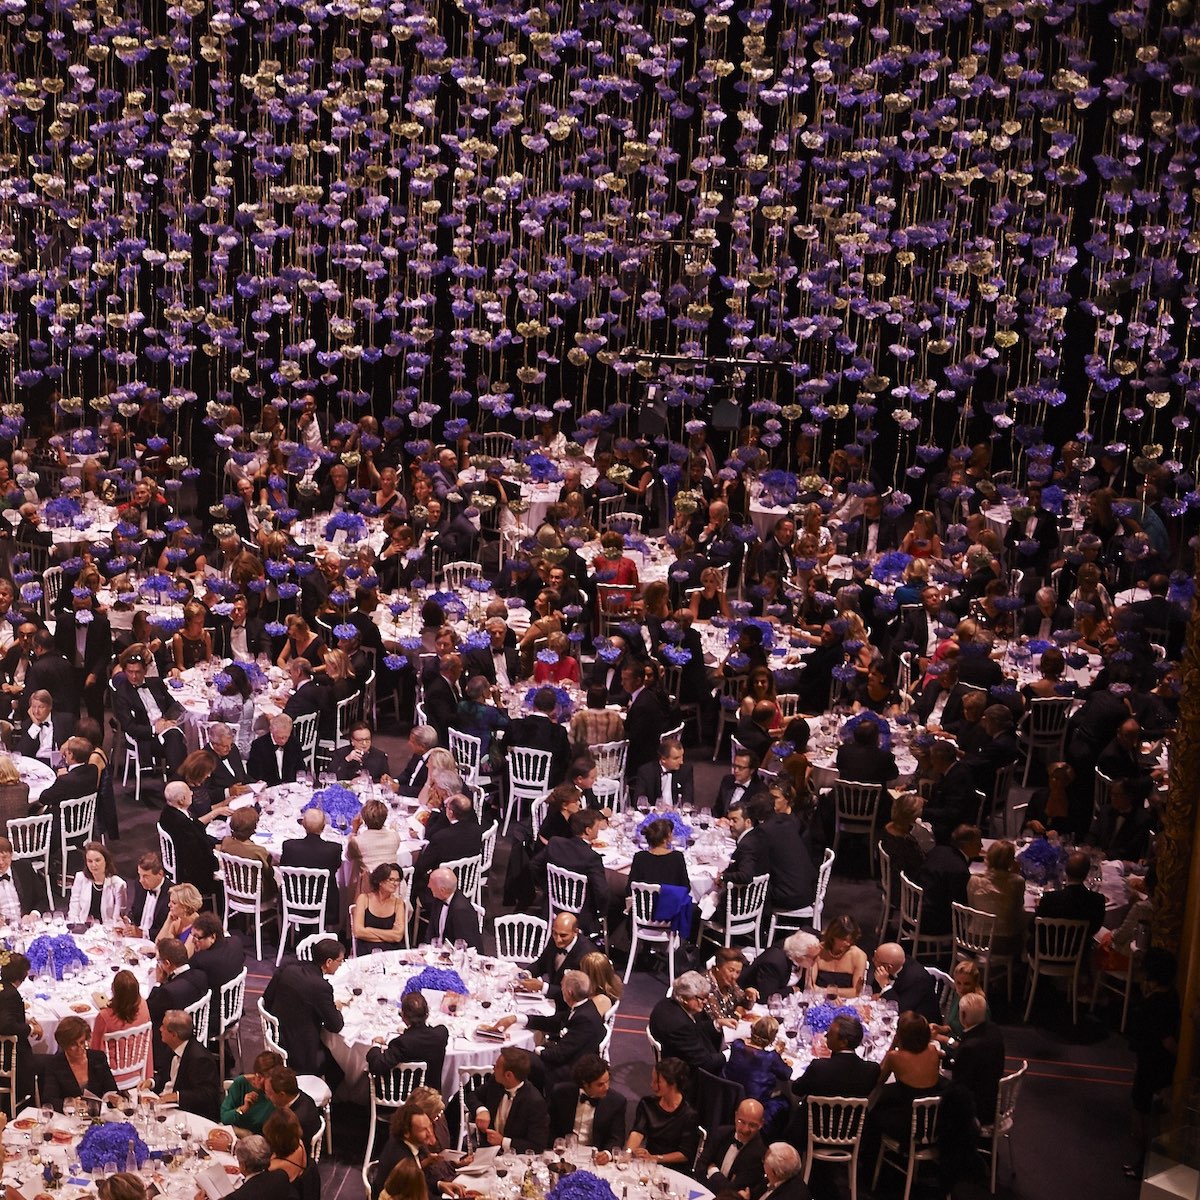 Designer Rebecca Louise Law dramatically raised 6,200 indigo hydrangeas over guests dining inside the Théâtre Royal de la Monnaie in Brussels.